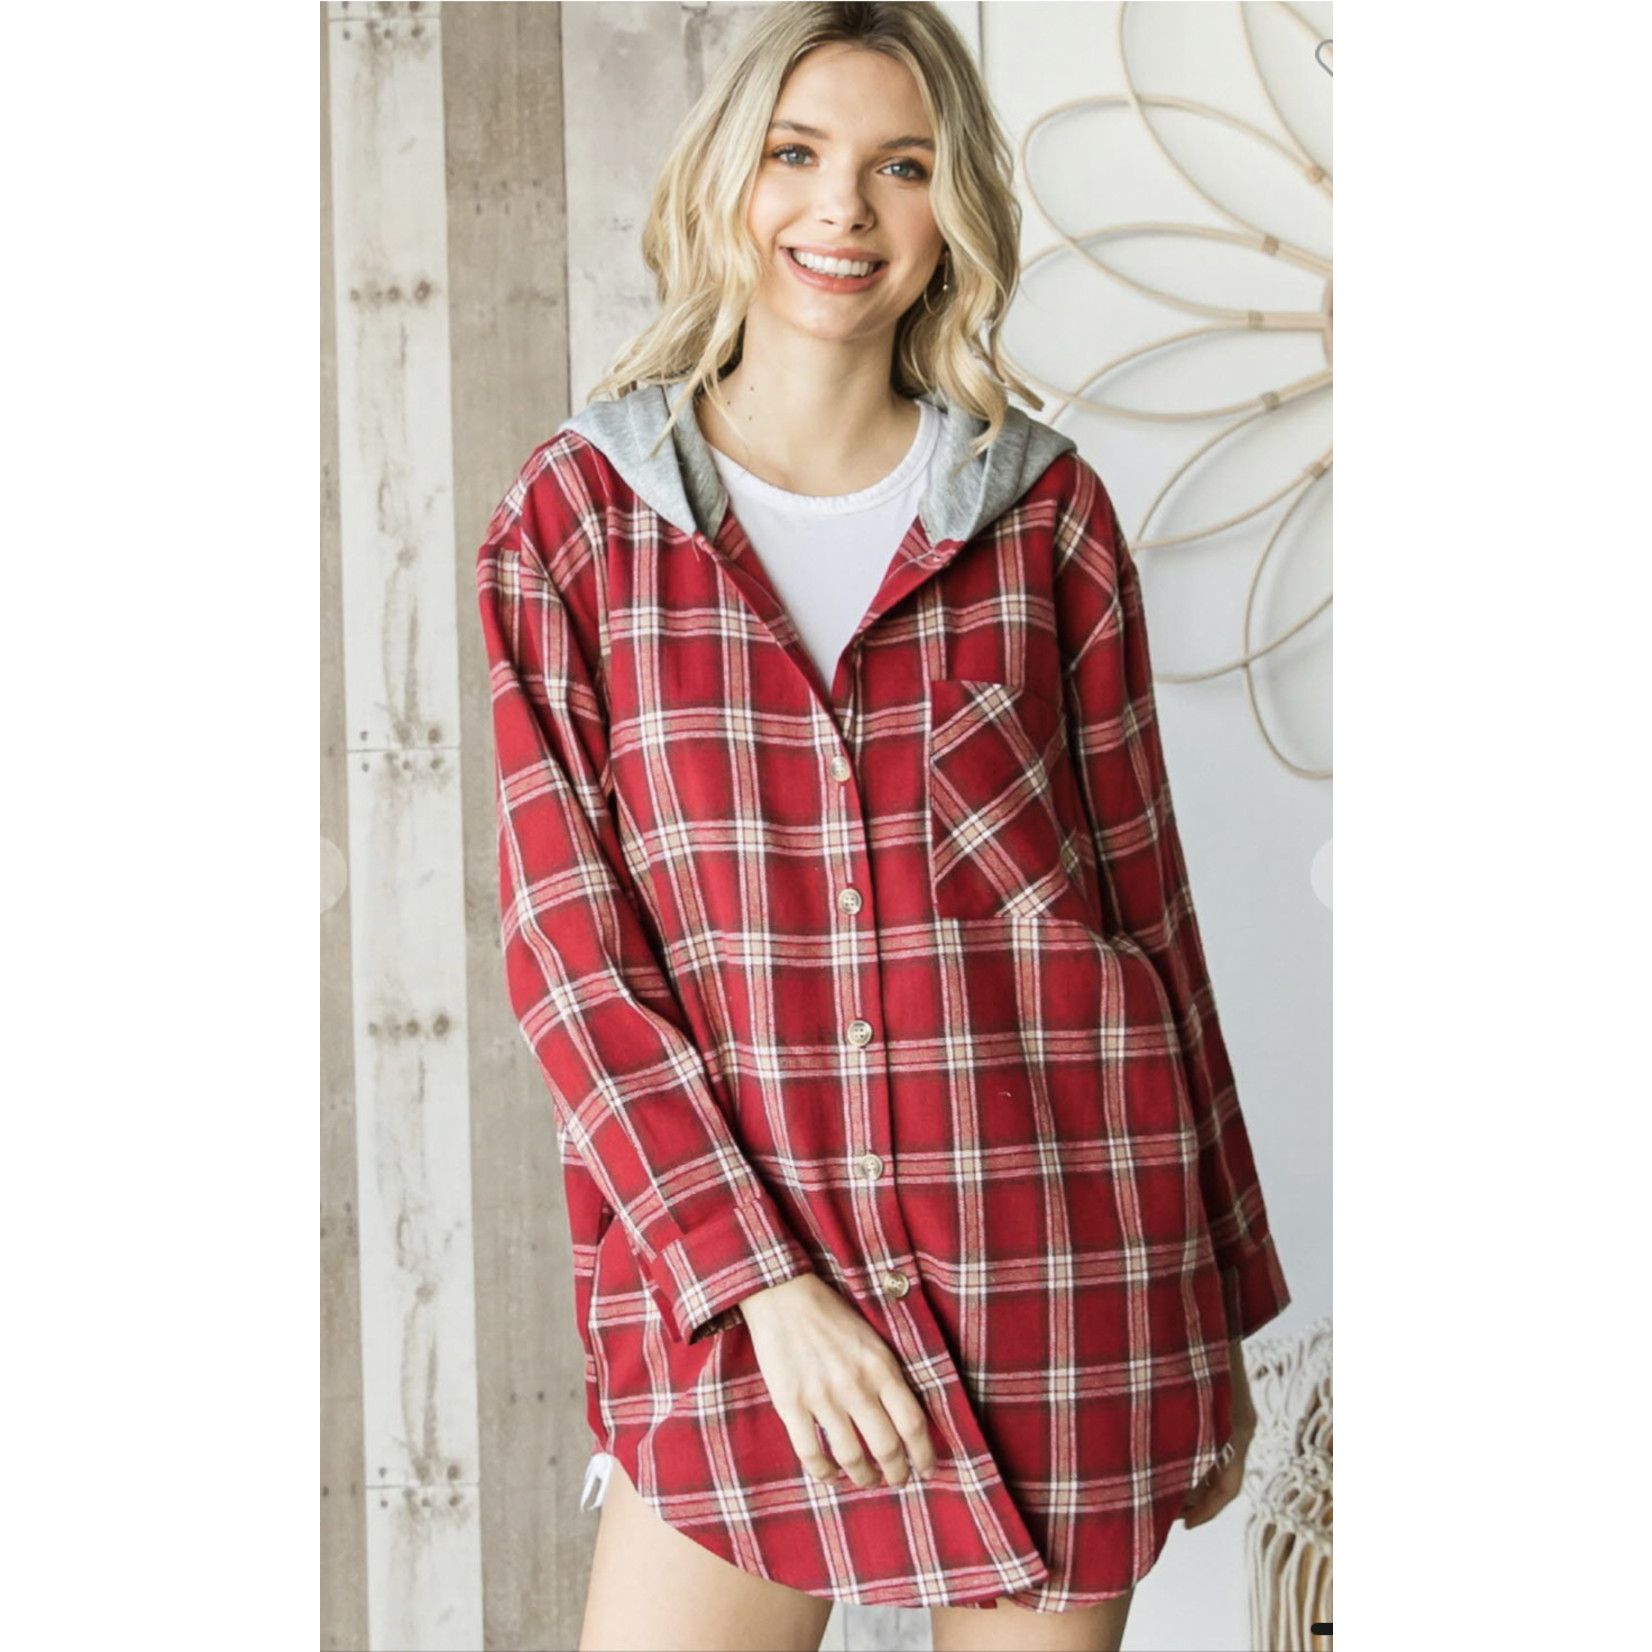 Clothing of America Clothing of America Plaid Button Down with Hood Red L